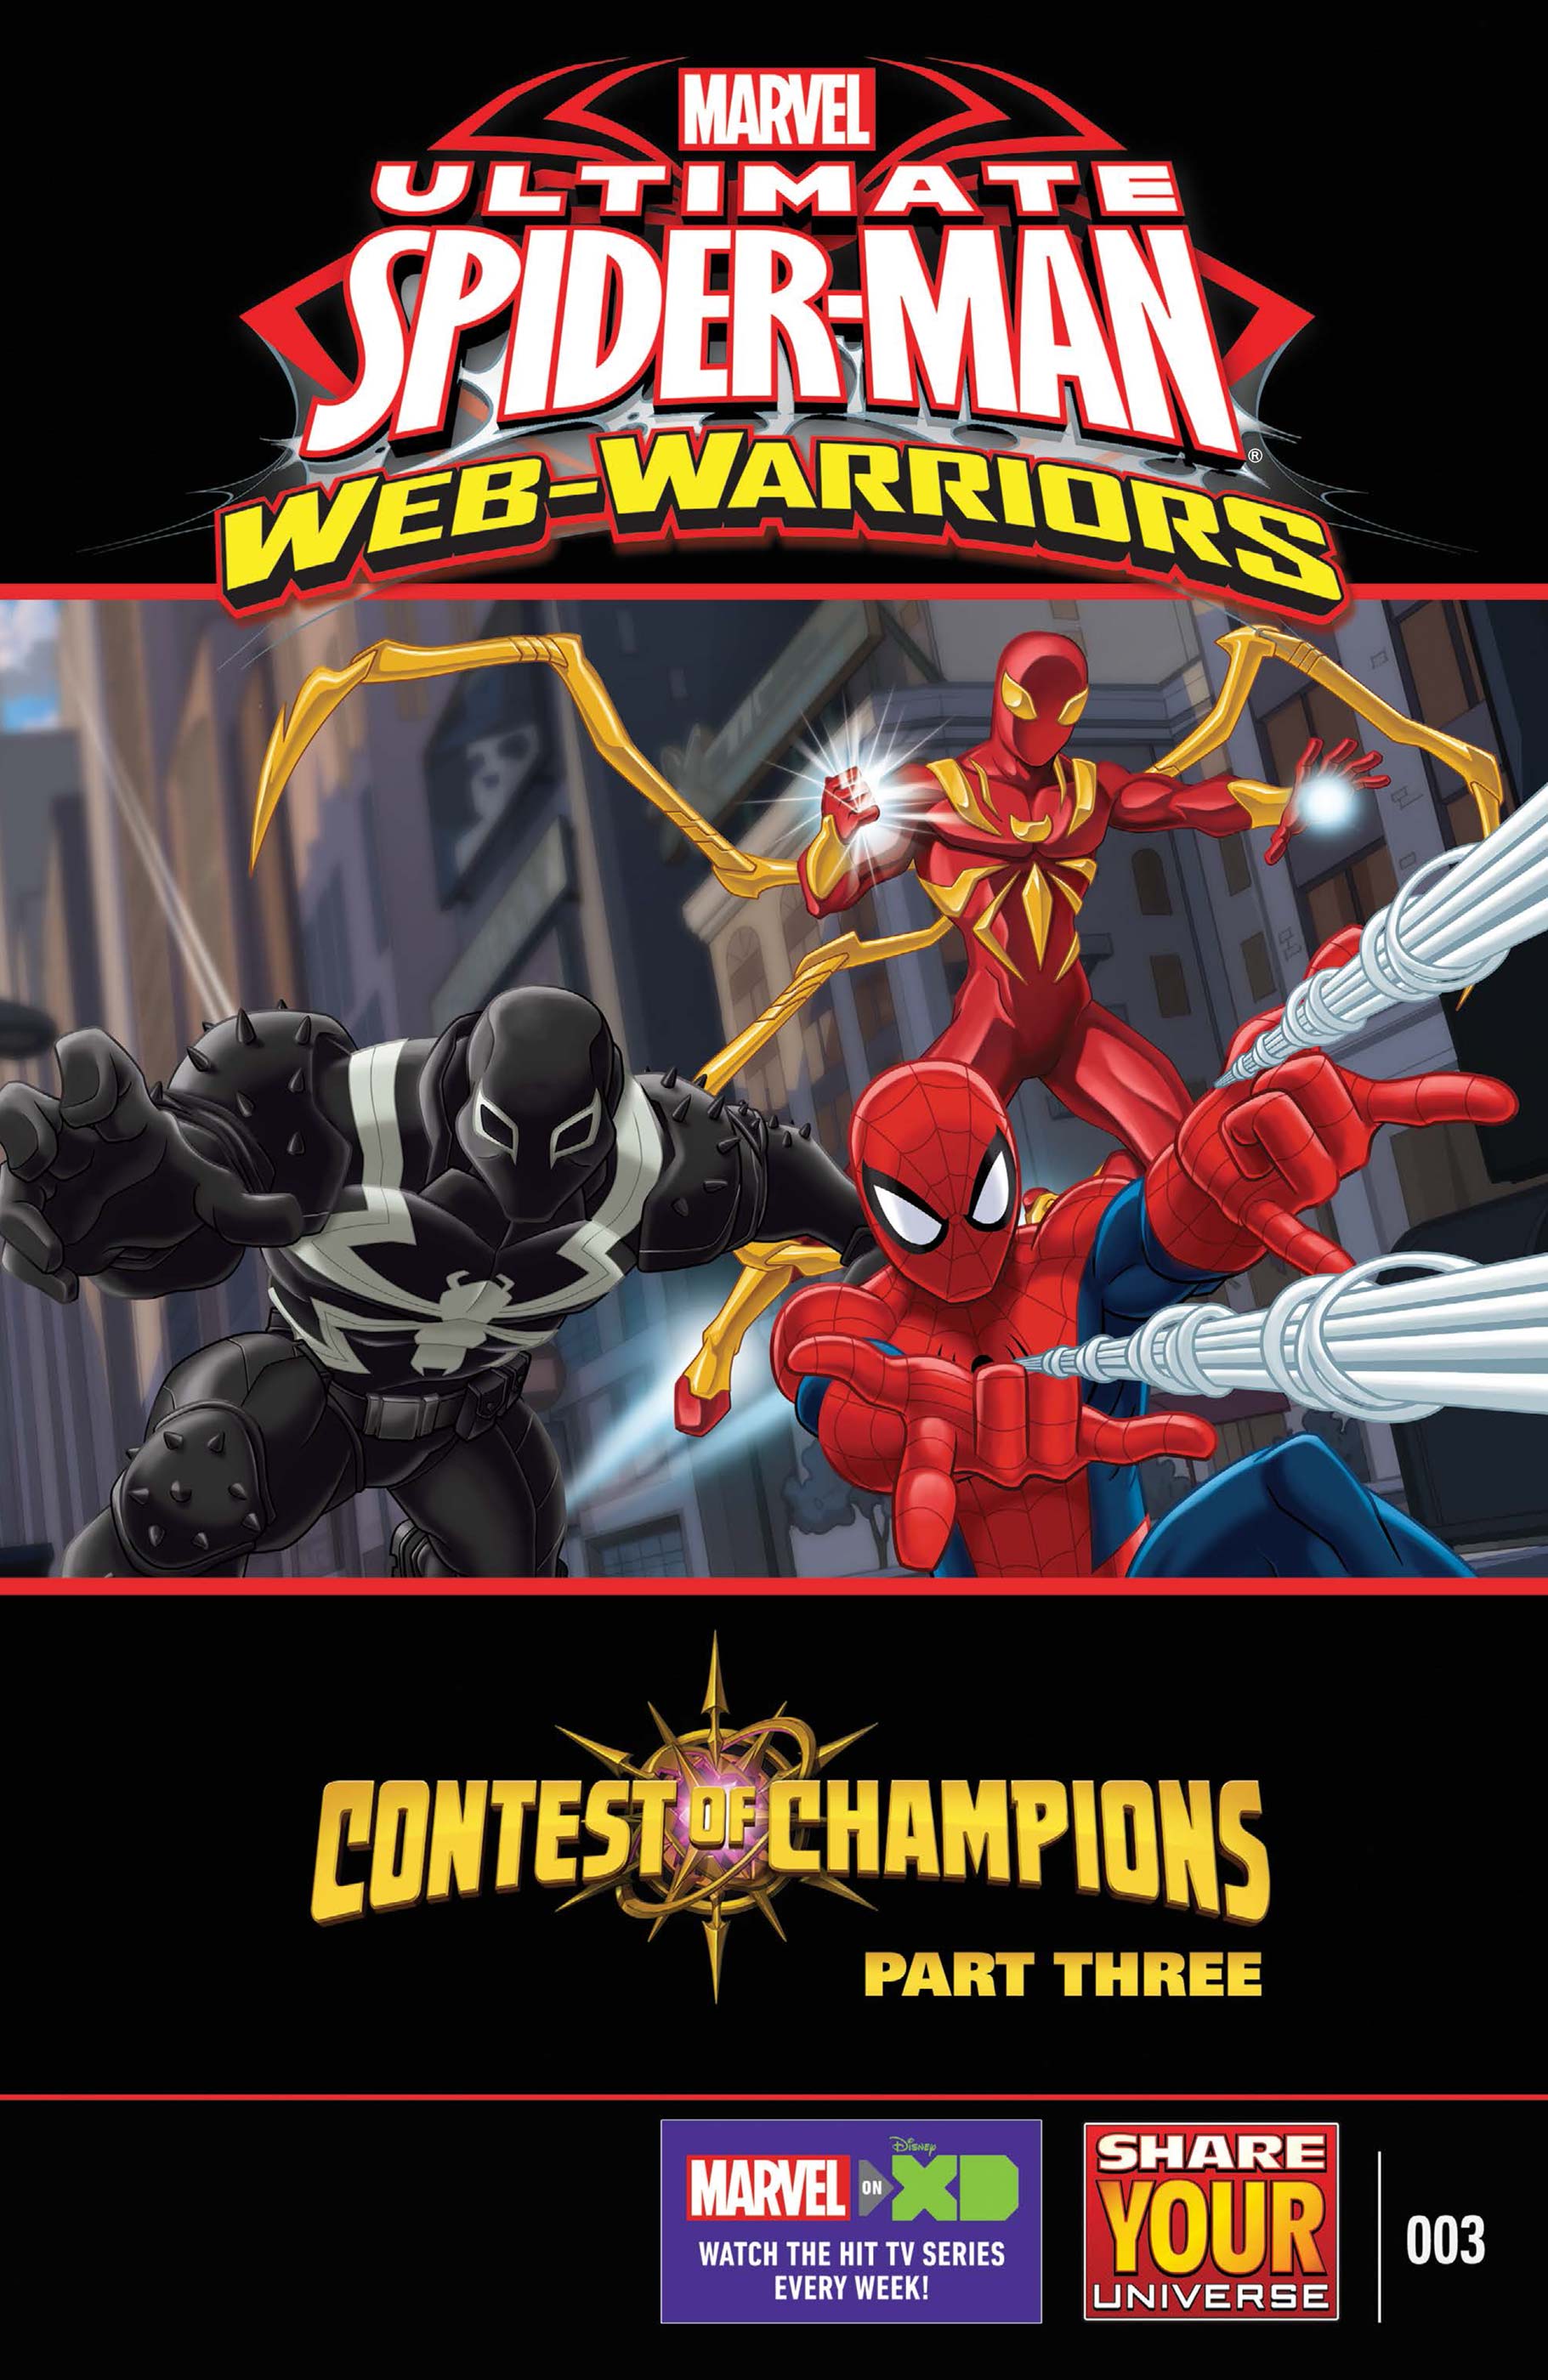 Marvel Universe Ultimate Spider-Man: Contest of Champions (2016) #3